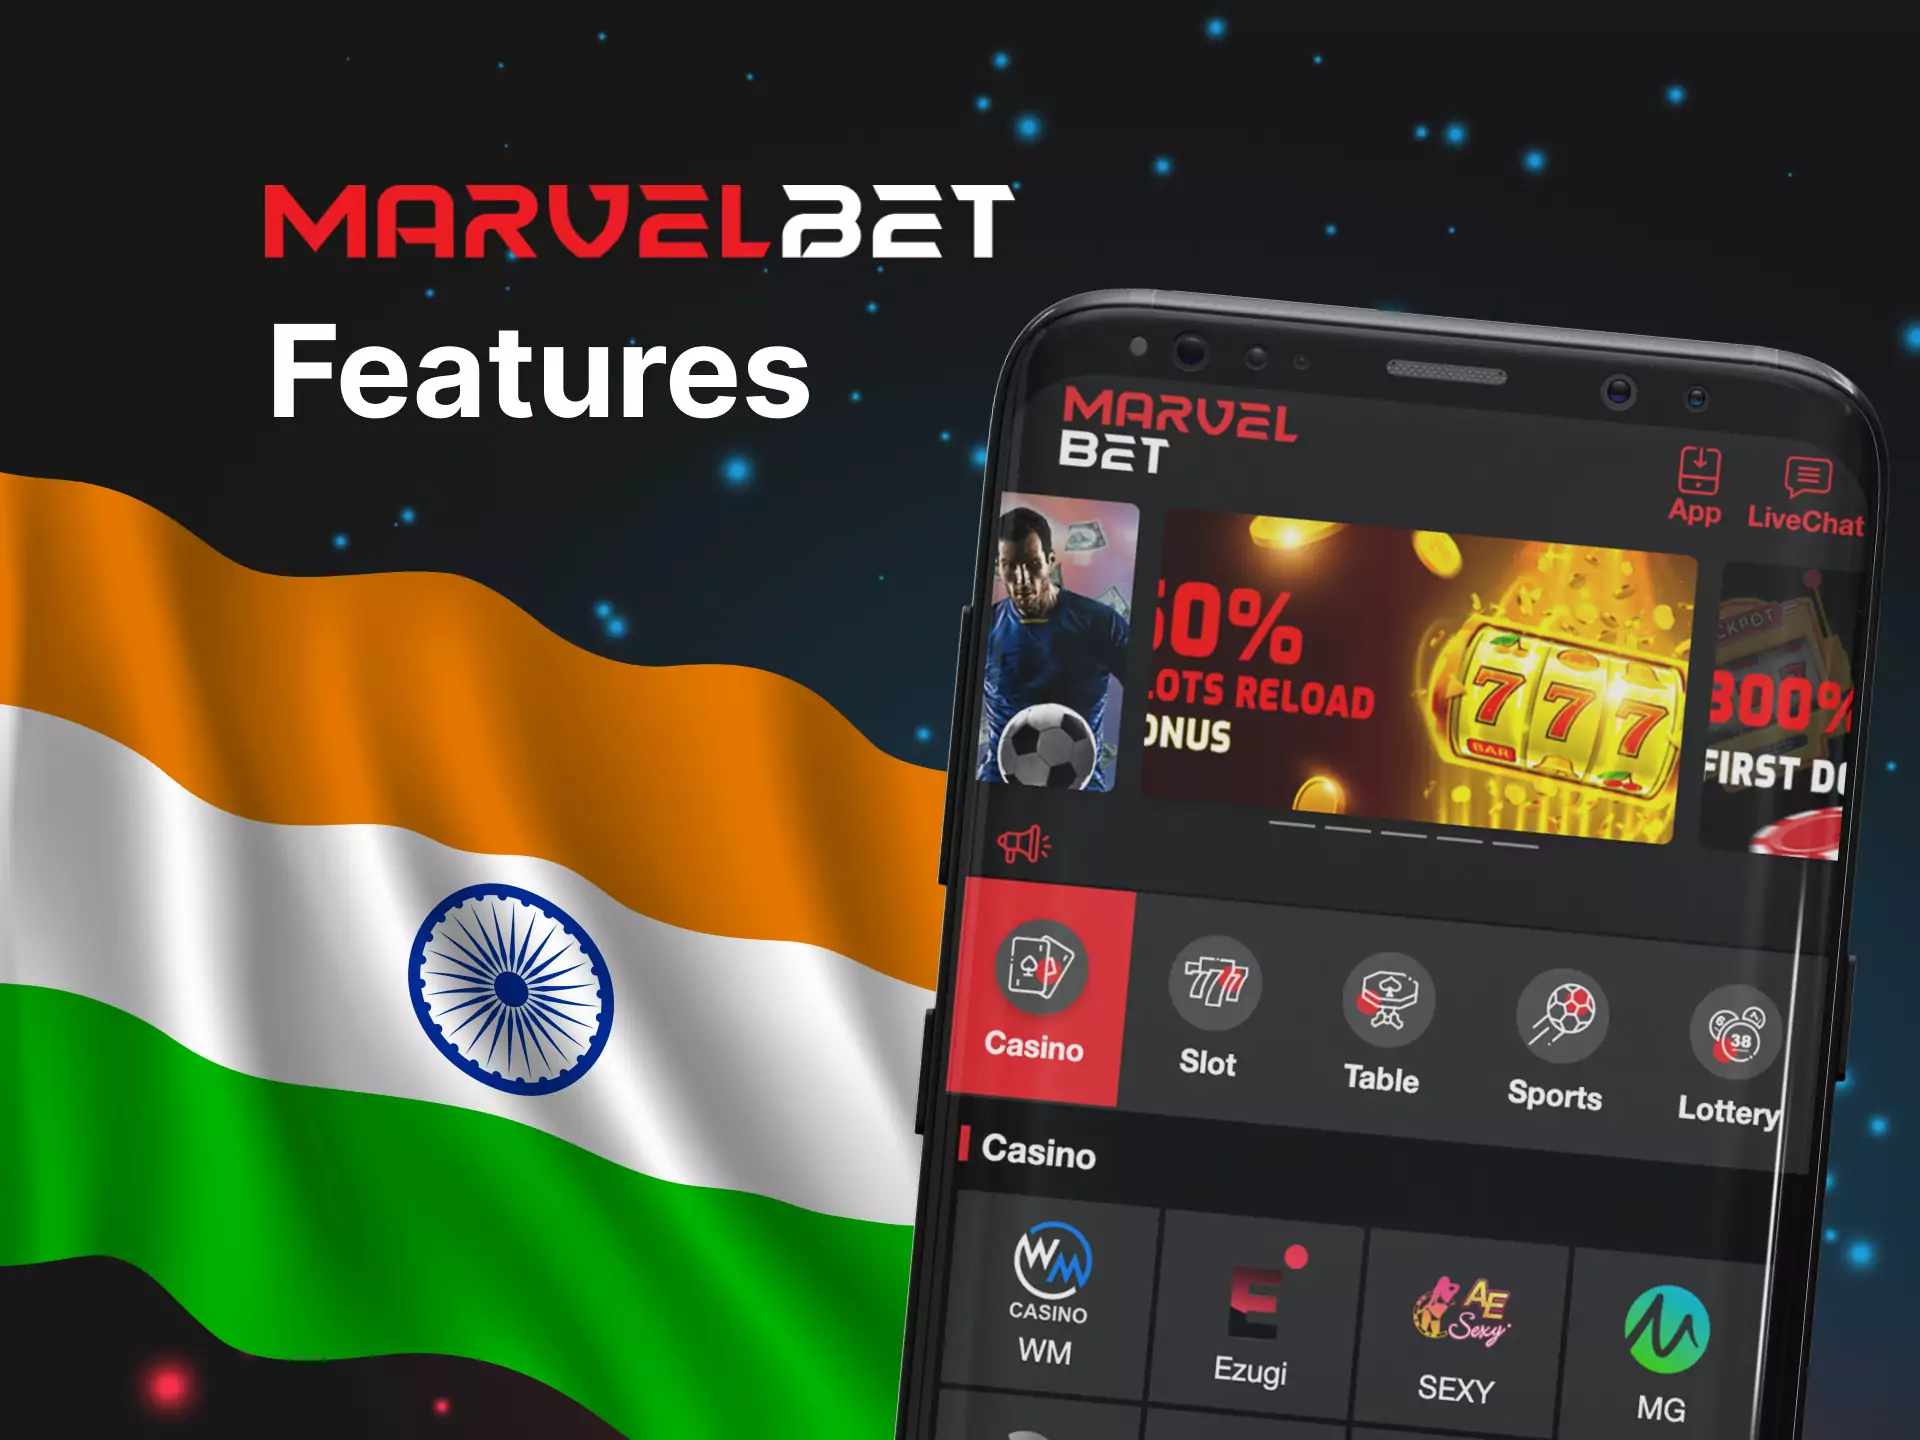 Marvelbet is an Indian-oriented bookmaker, so you can deposit and withdraw money in rupees.